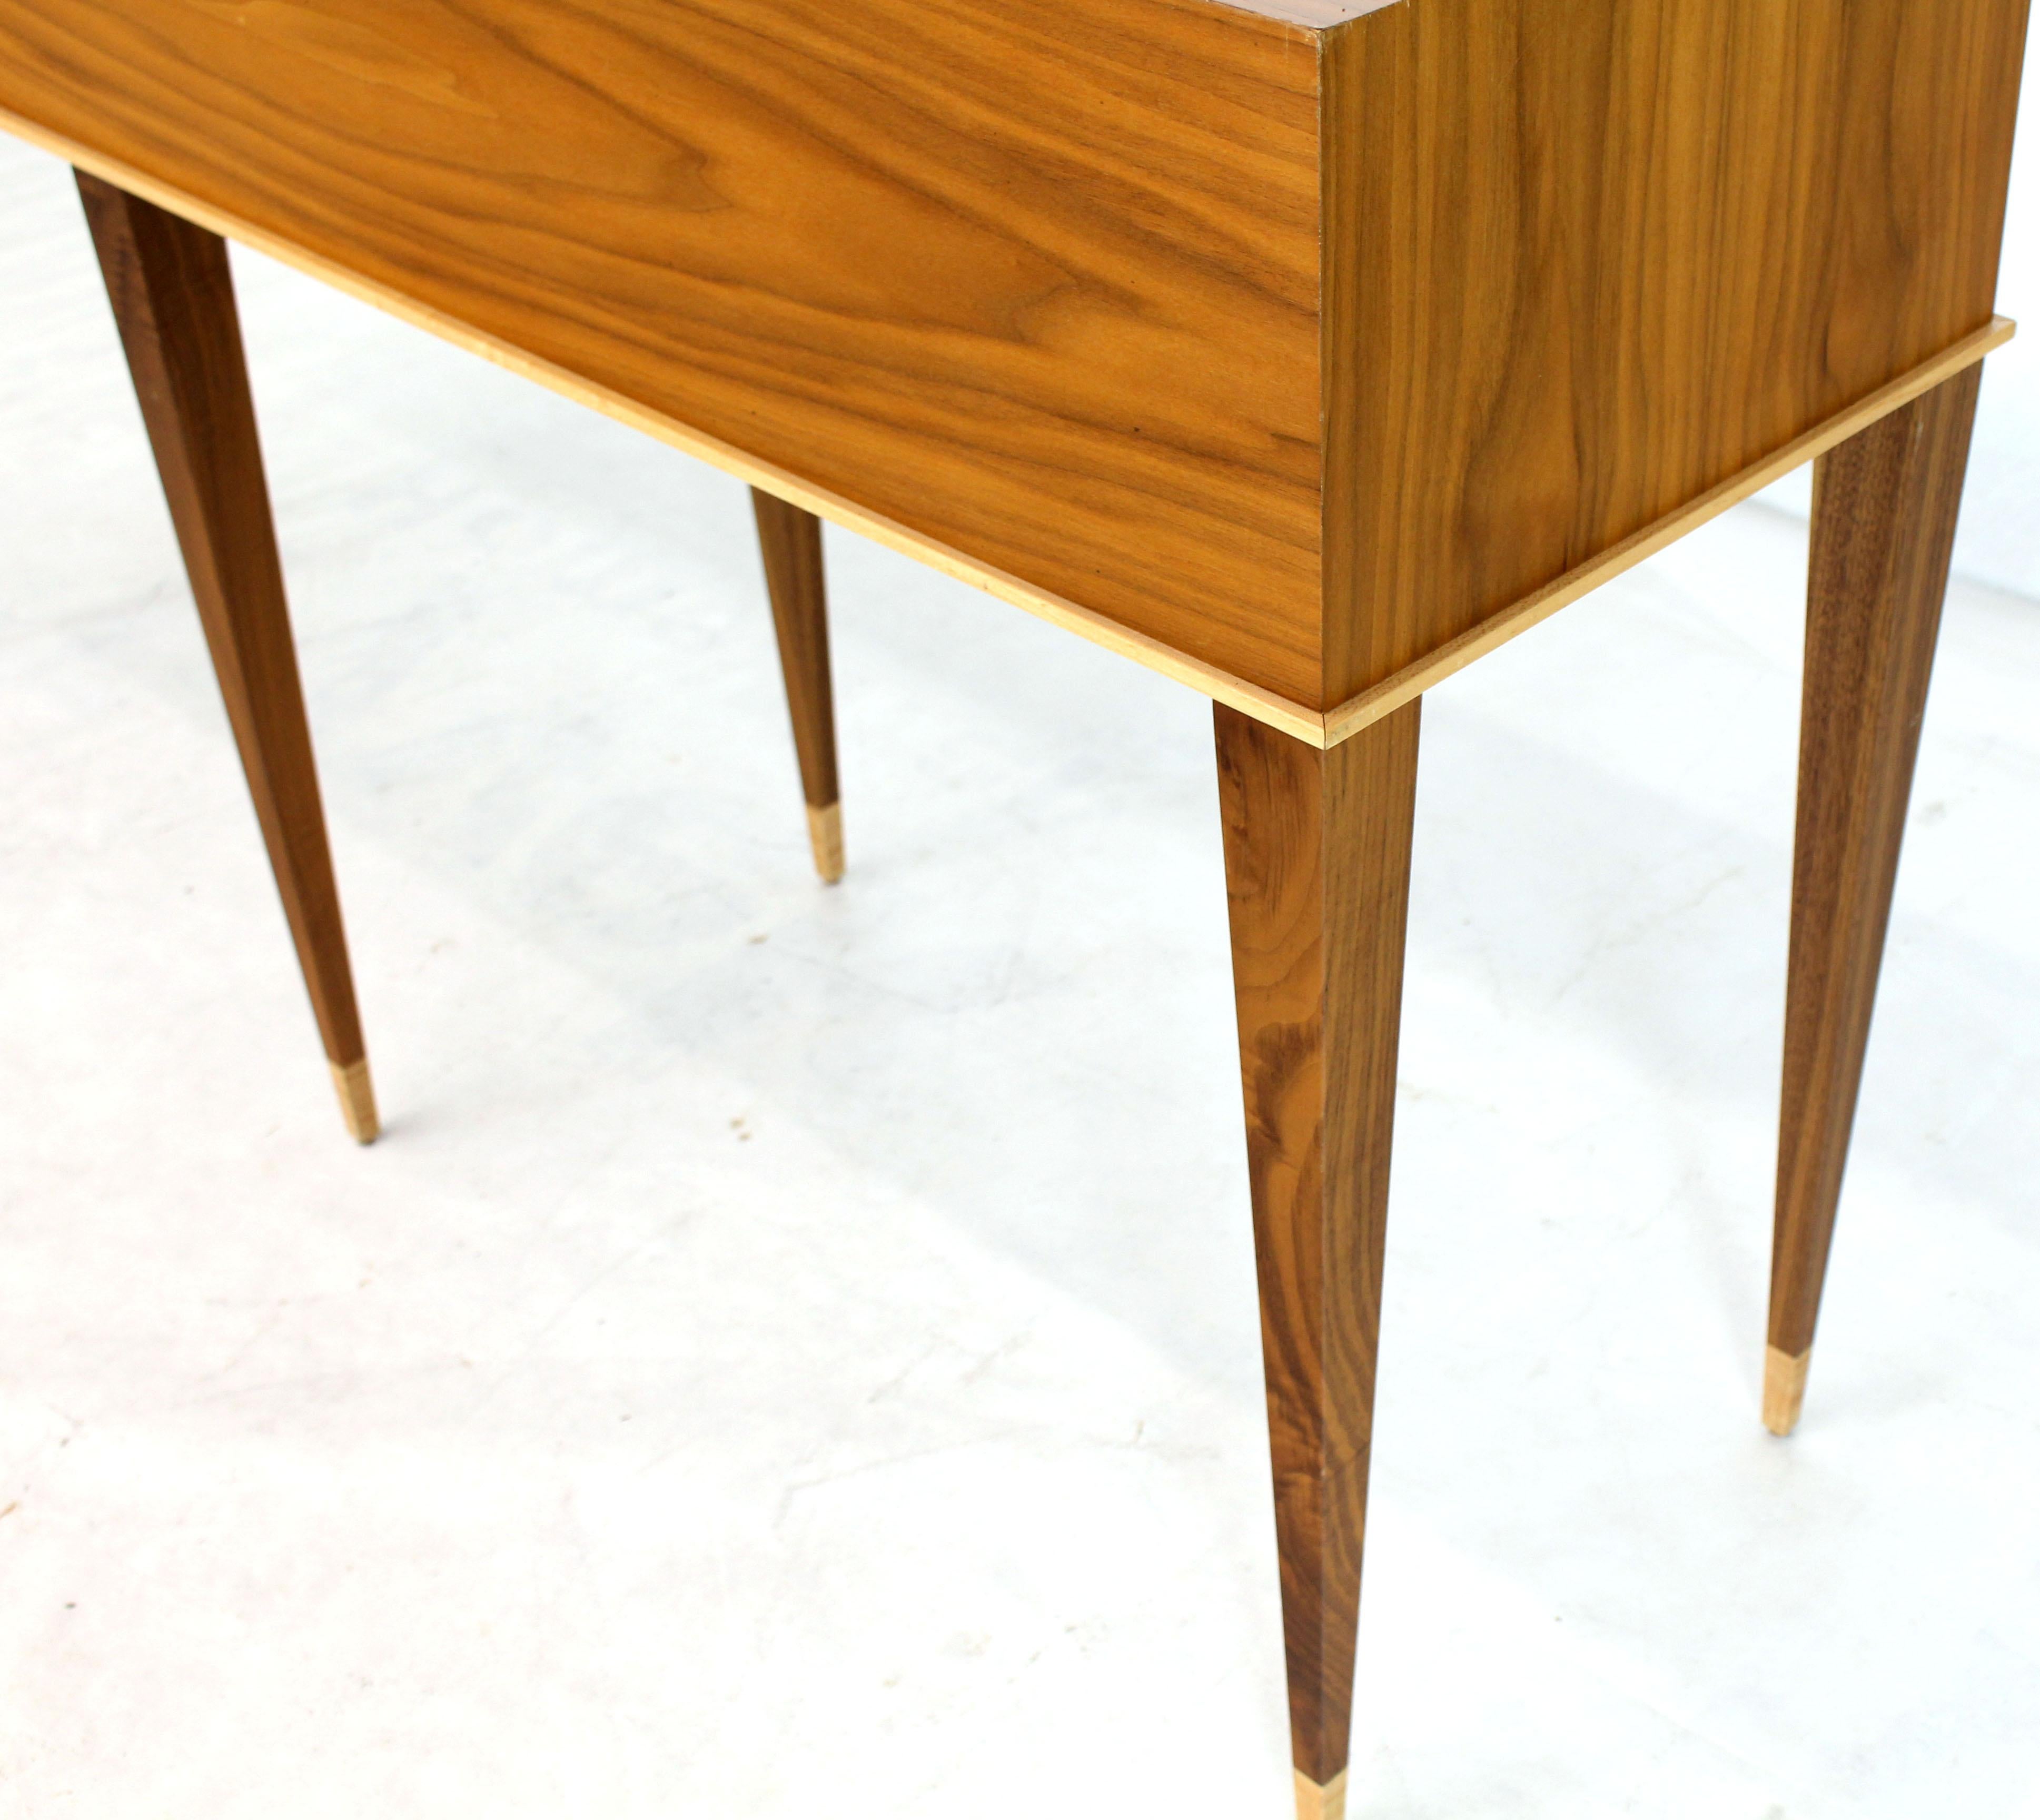 Mid-Century Modern rectangular walnut console table on six tapered legs with higher wood accents.